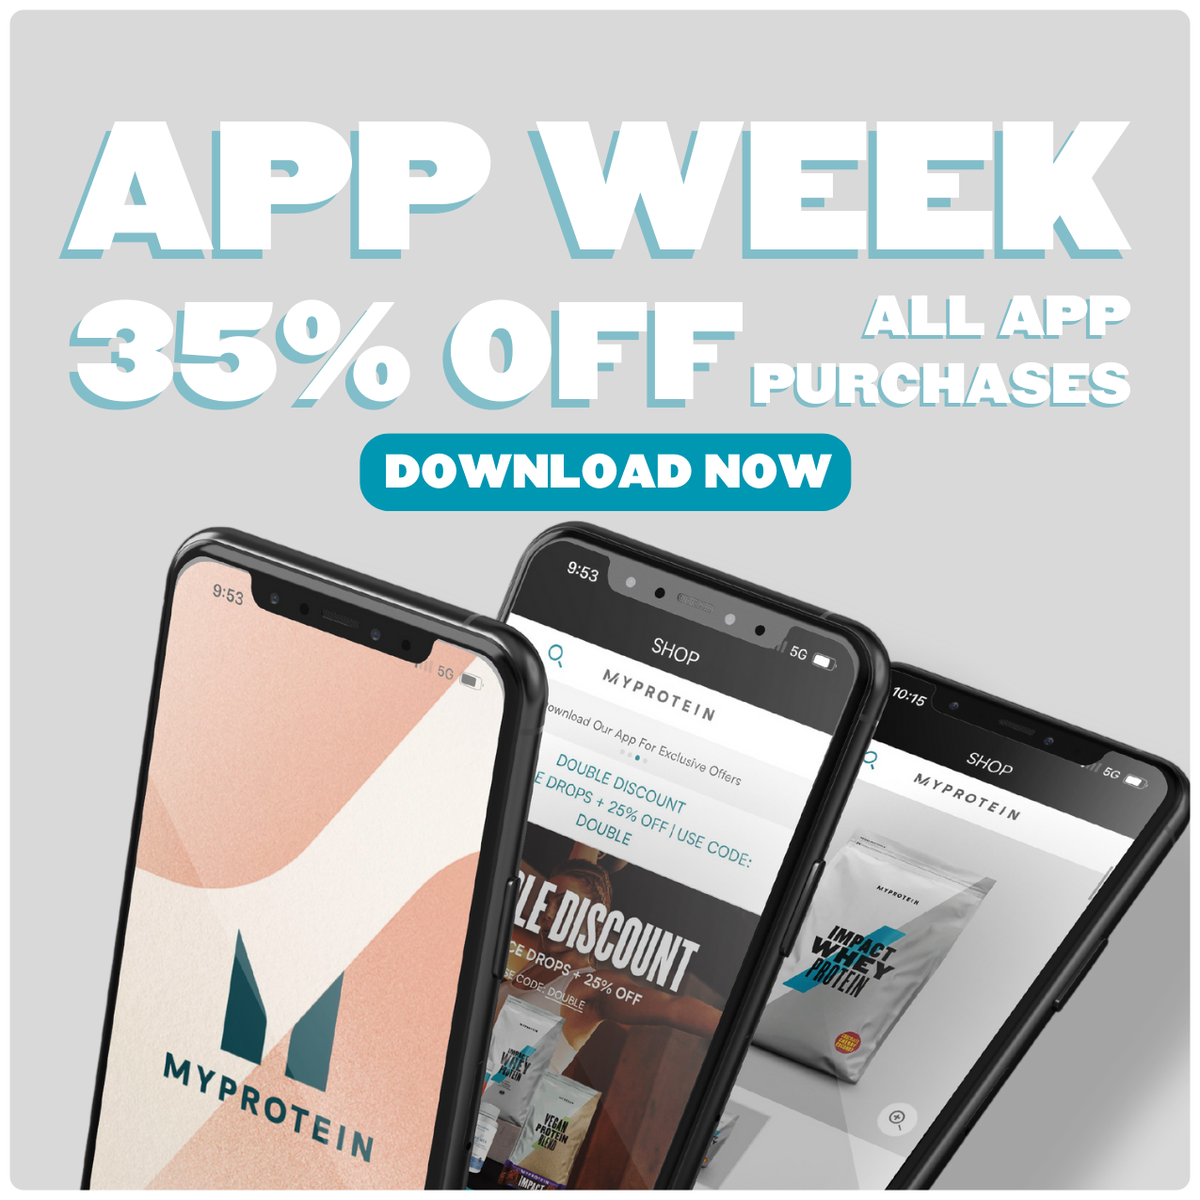 App Week 35% off all app purchases - download the app now